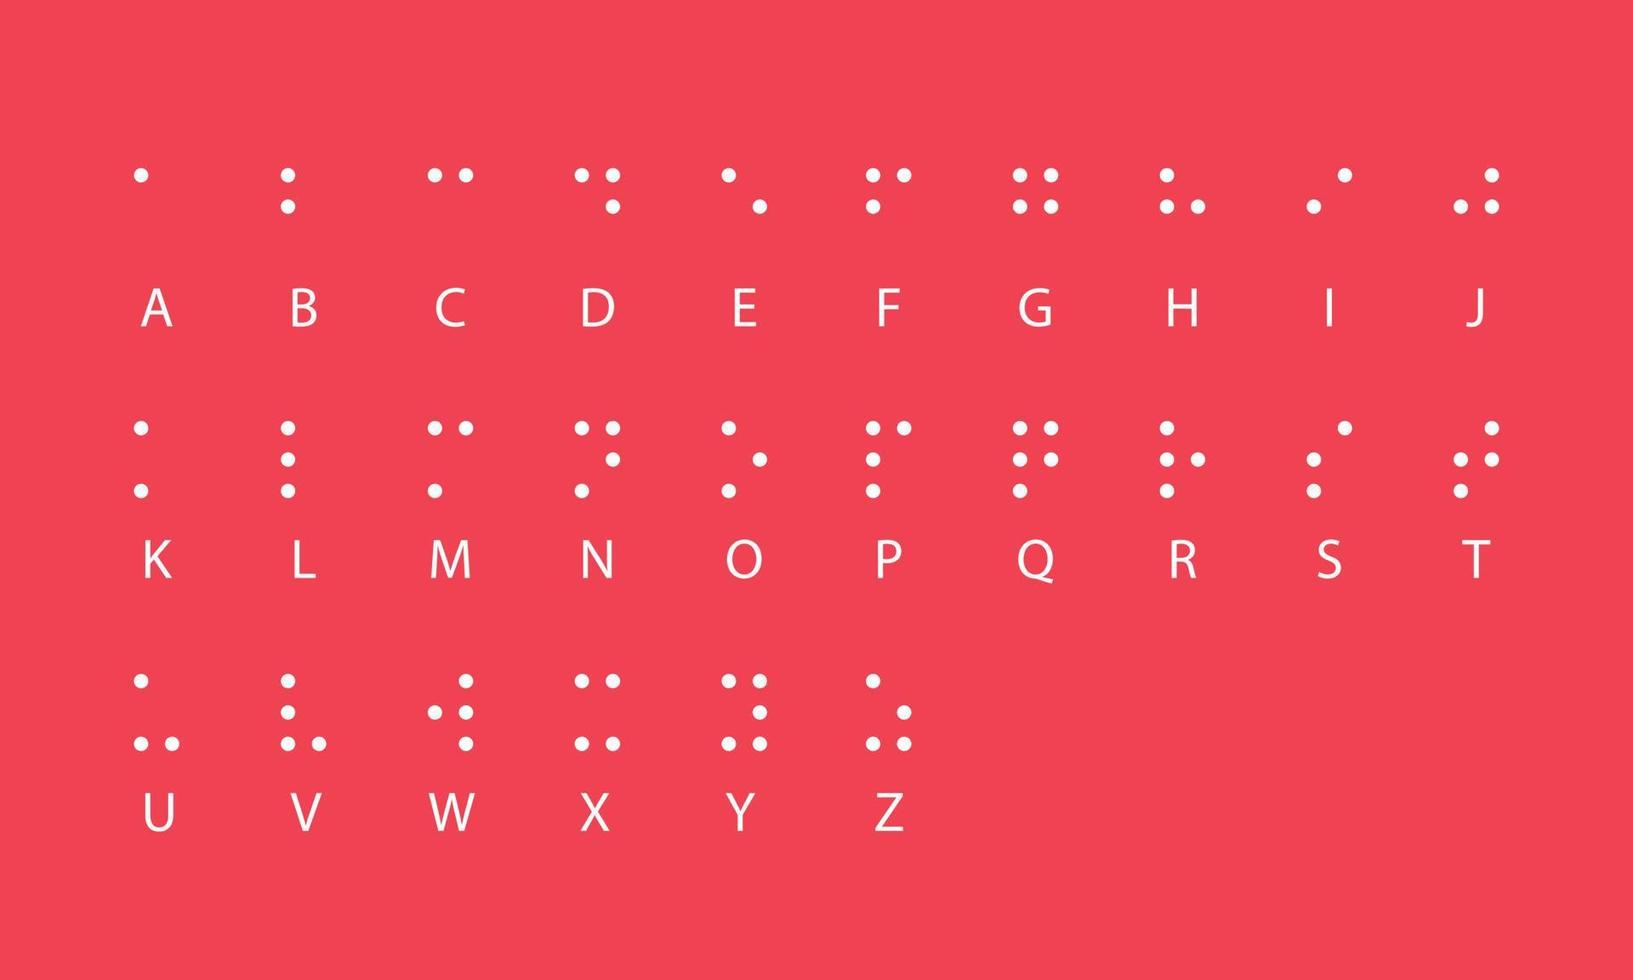 Braille alphabet letters. Tactile writing system used by people who are visually impaired. Vector illustration